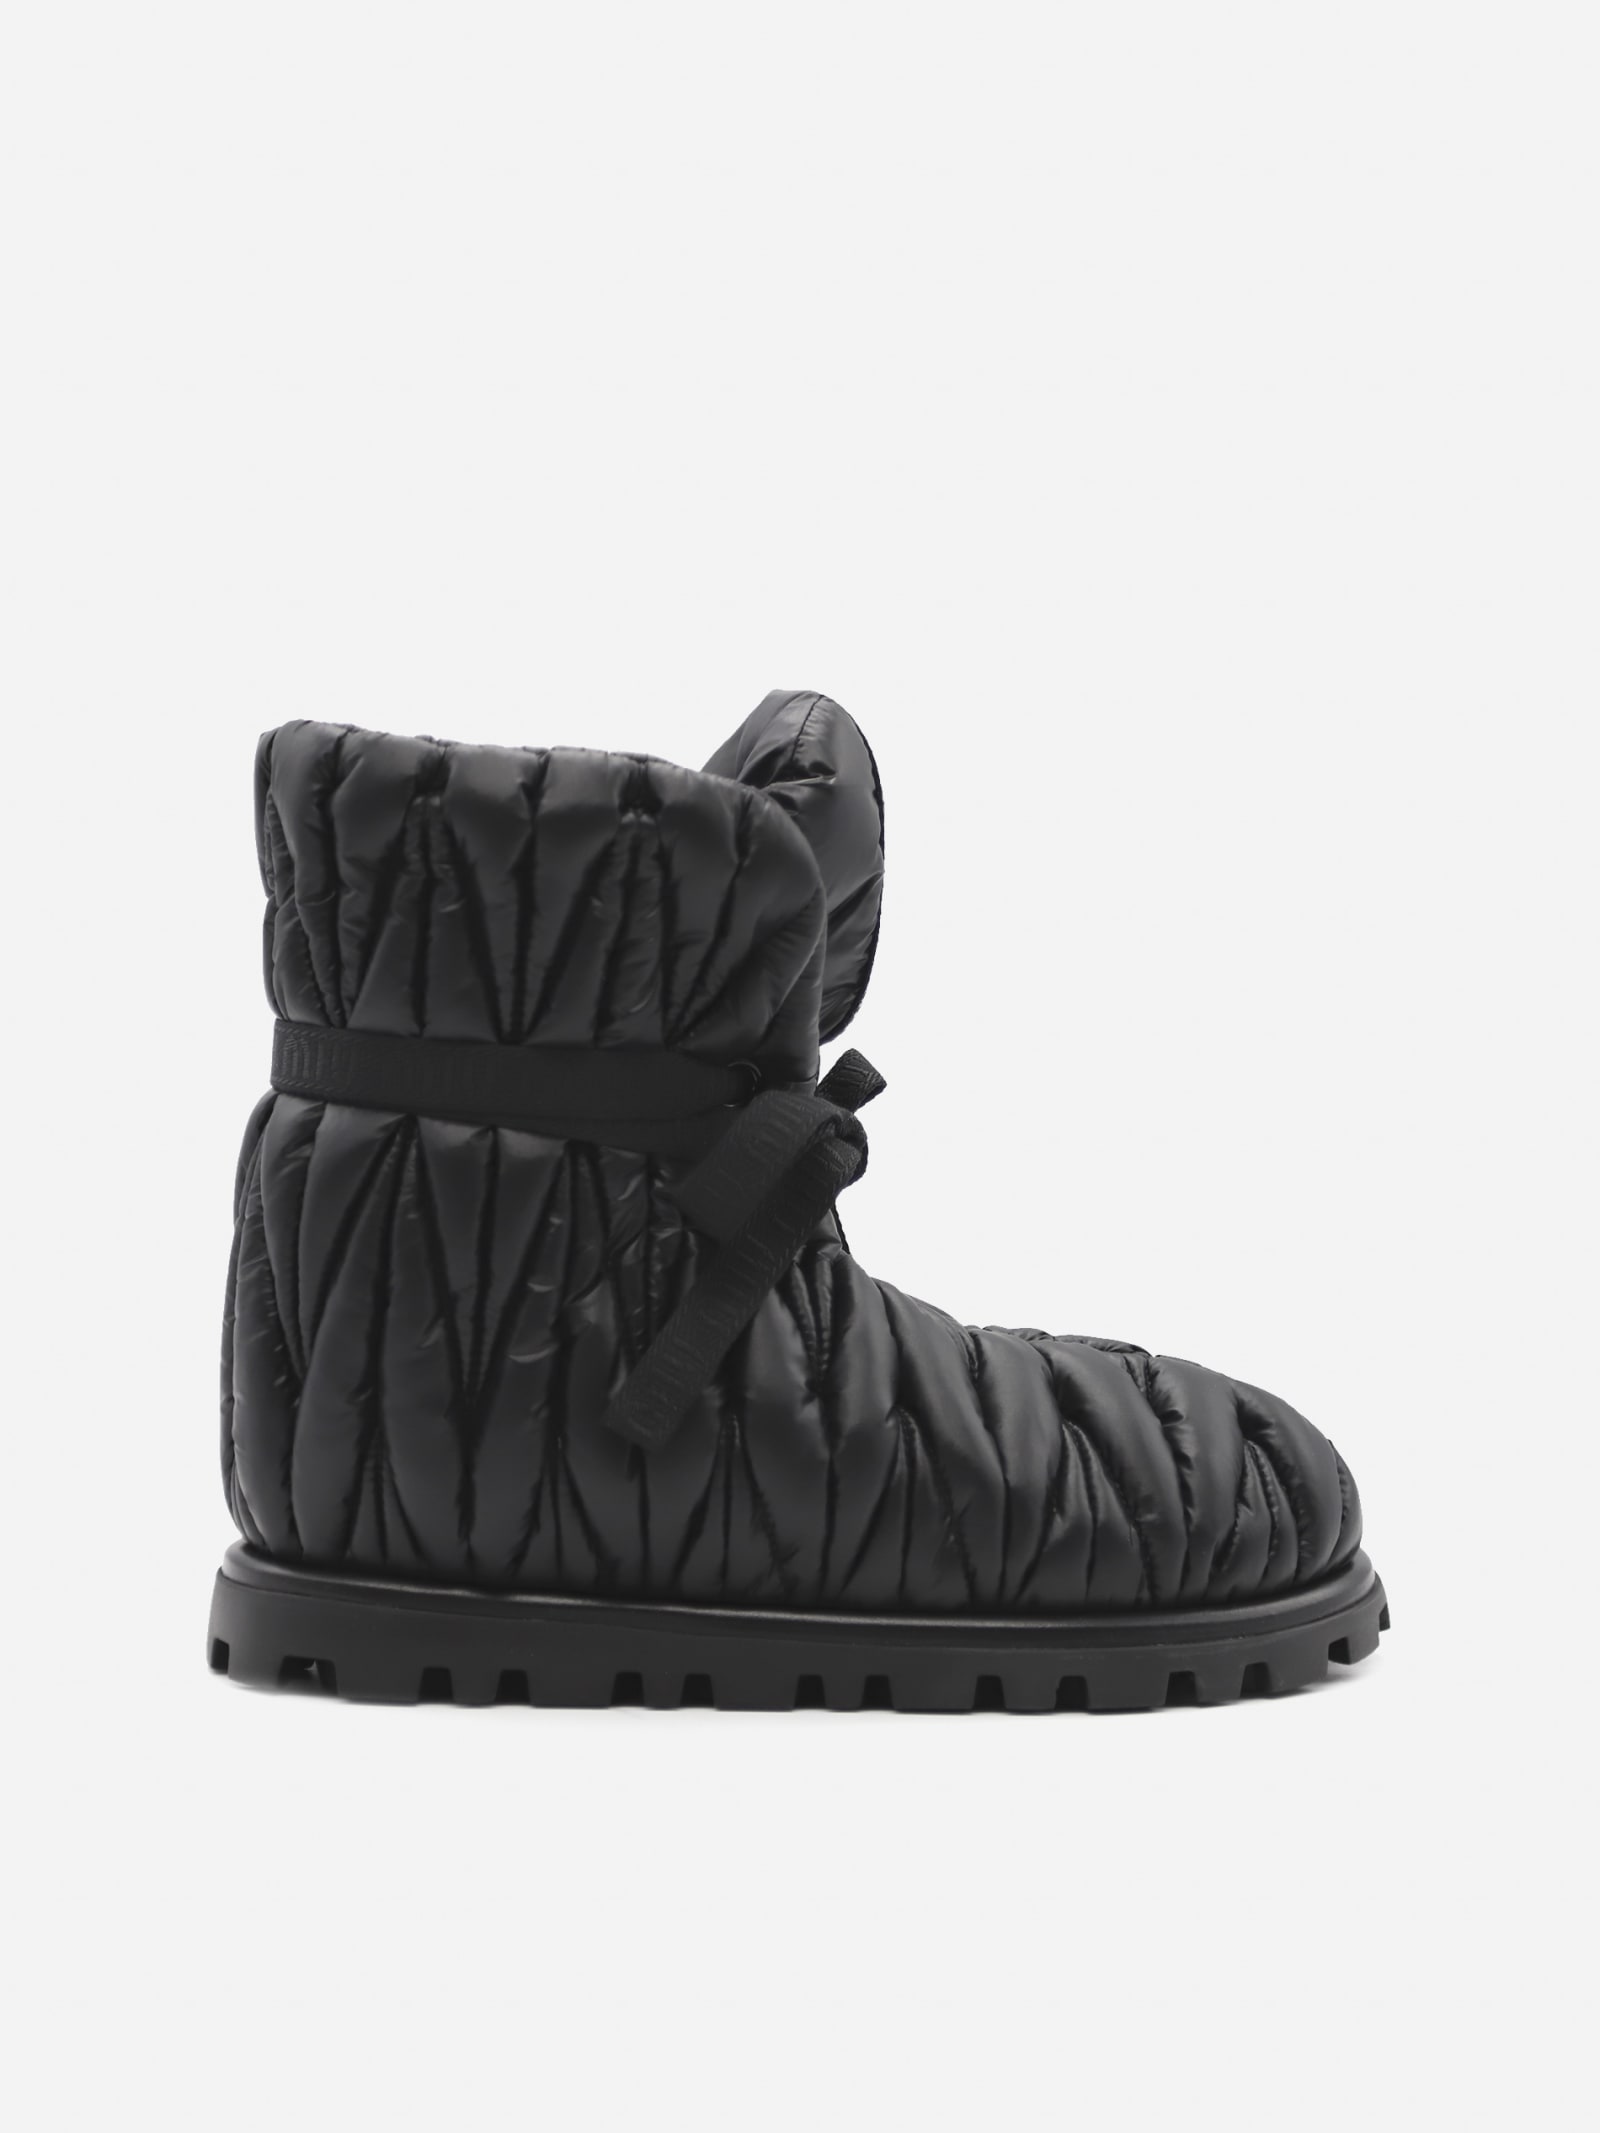 Buy Miu Miu Quilted Nylon Ankle Boots online, shop Miu Miu shoes with free shipping